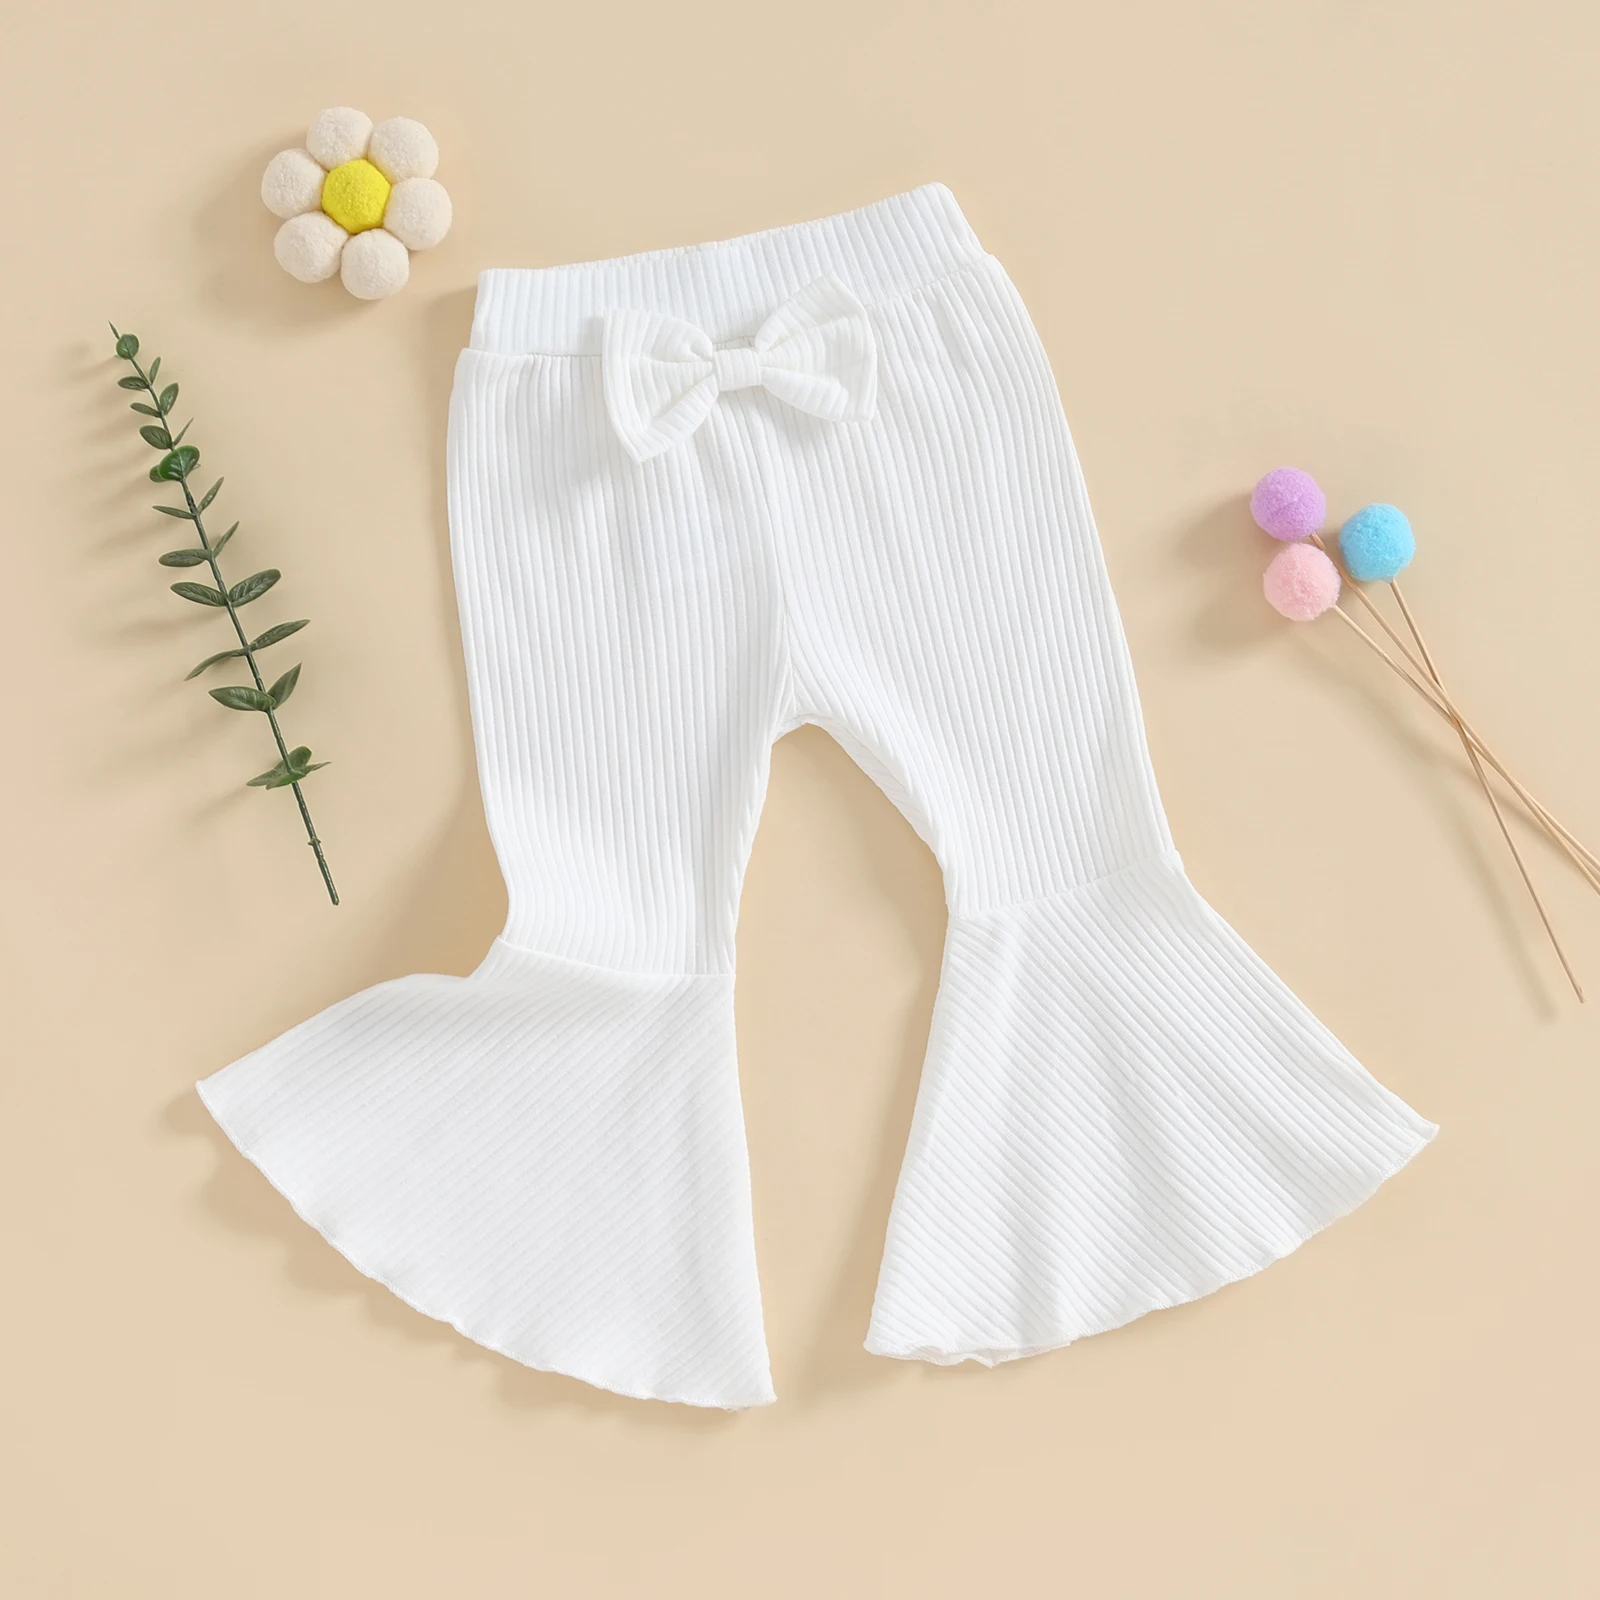 S9ec731bf89af40ec9cd7cd6a8b81c9b4t Cute Kids Baby Girls Flare Pants Soft Cotton Solid Color Ribbed Elastic Toddler Bell Bottoms Trousers Bow Ruffle Pants for Child